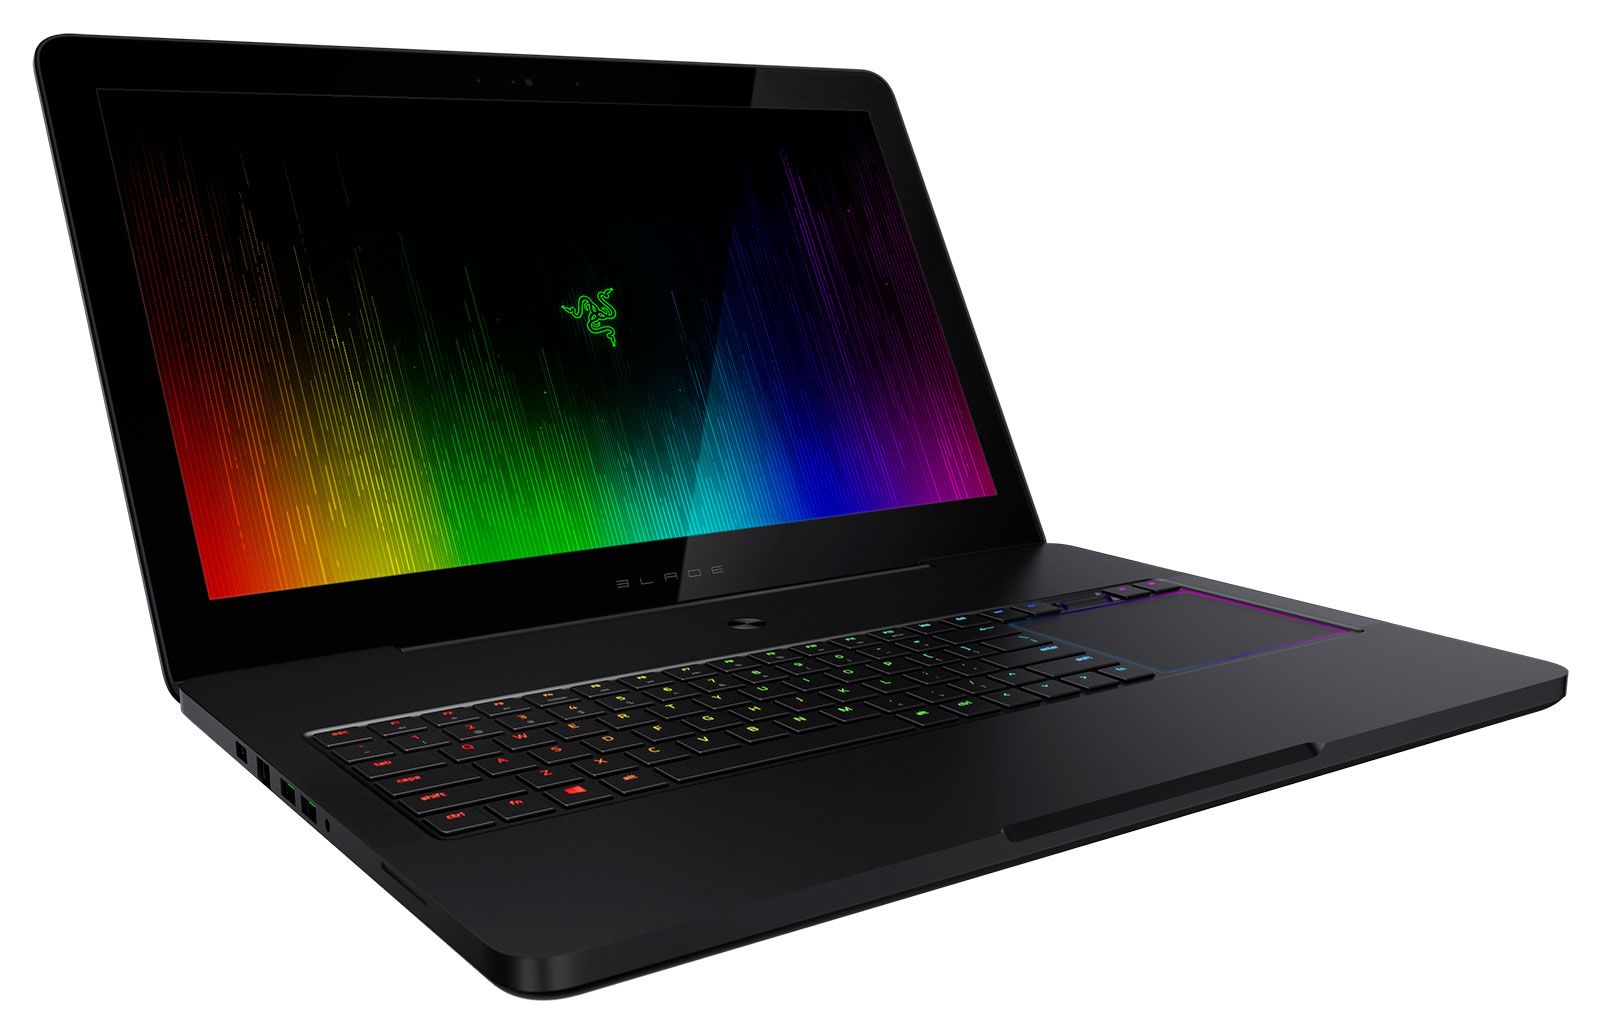 razer upgrades the blade pro laptop with thx certification and more powerful cpu image 1